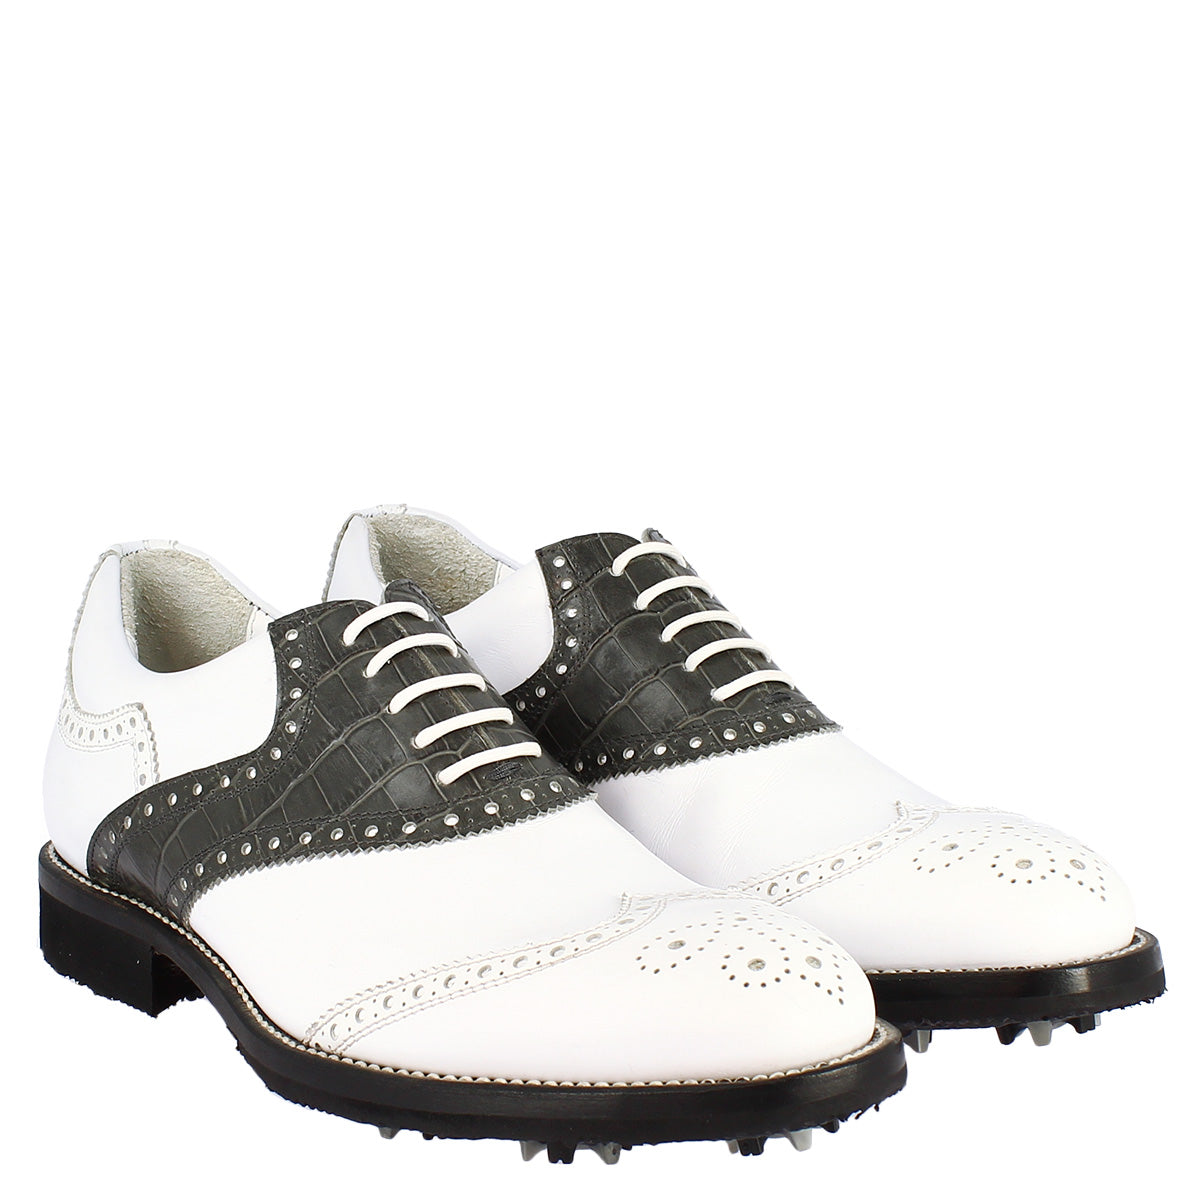 Classic handmade women's golf shoes in gray white calf leather